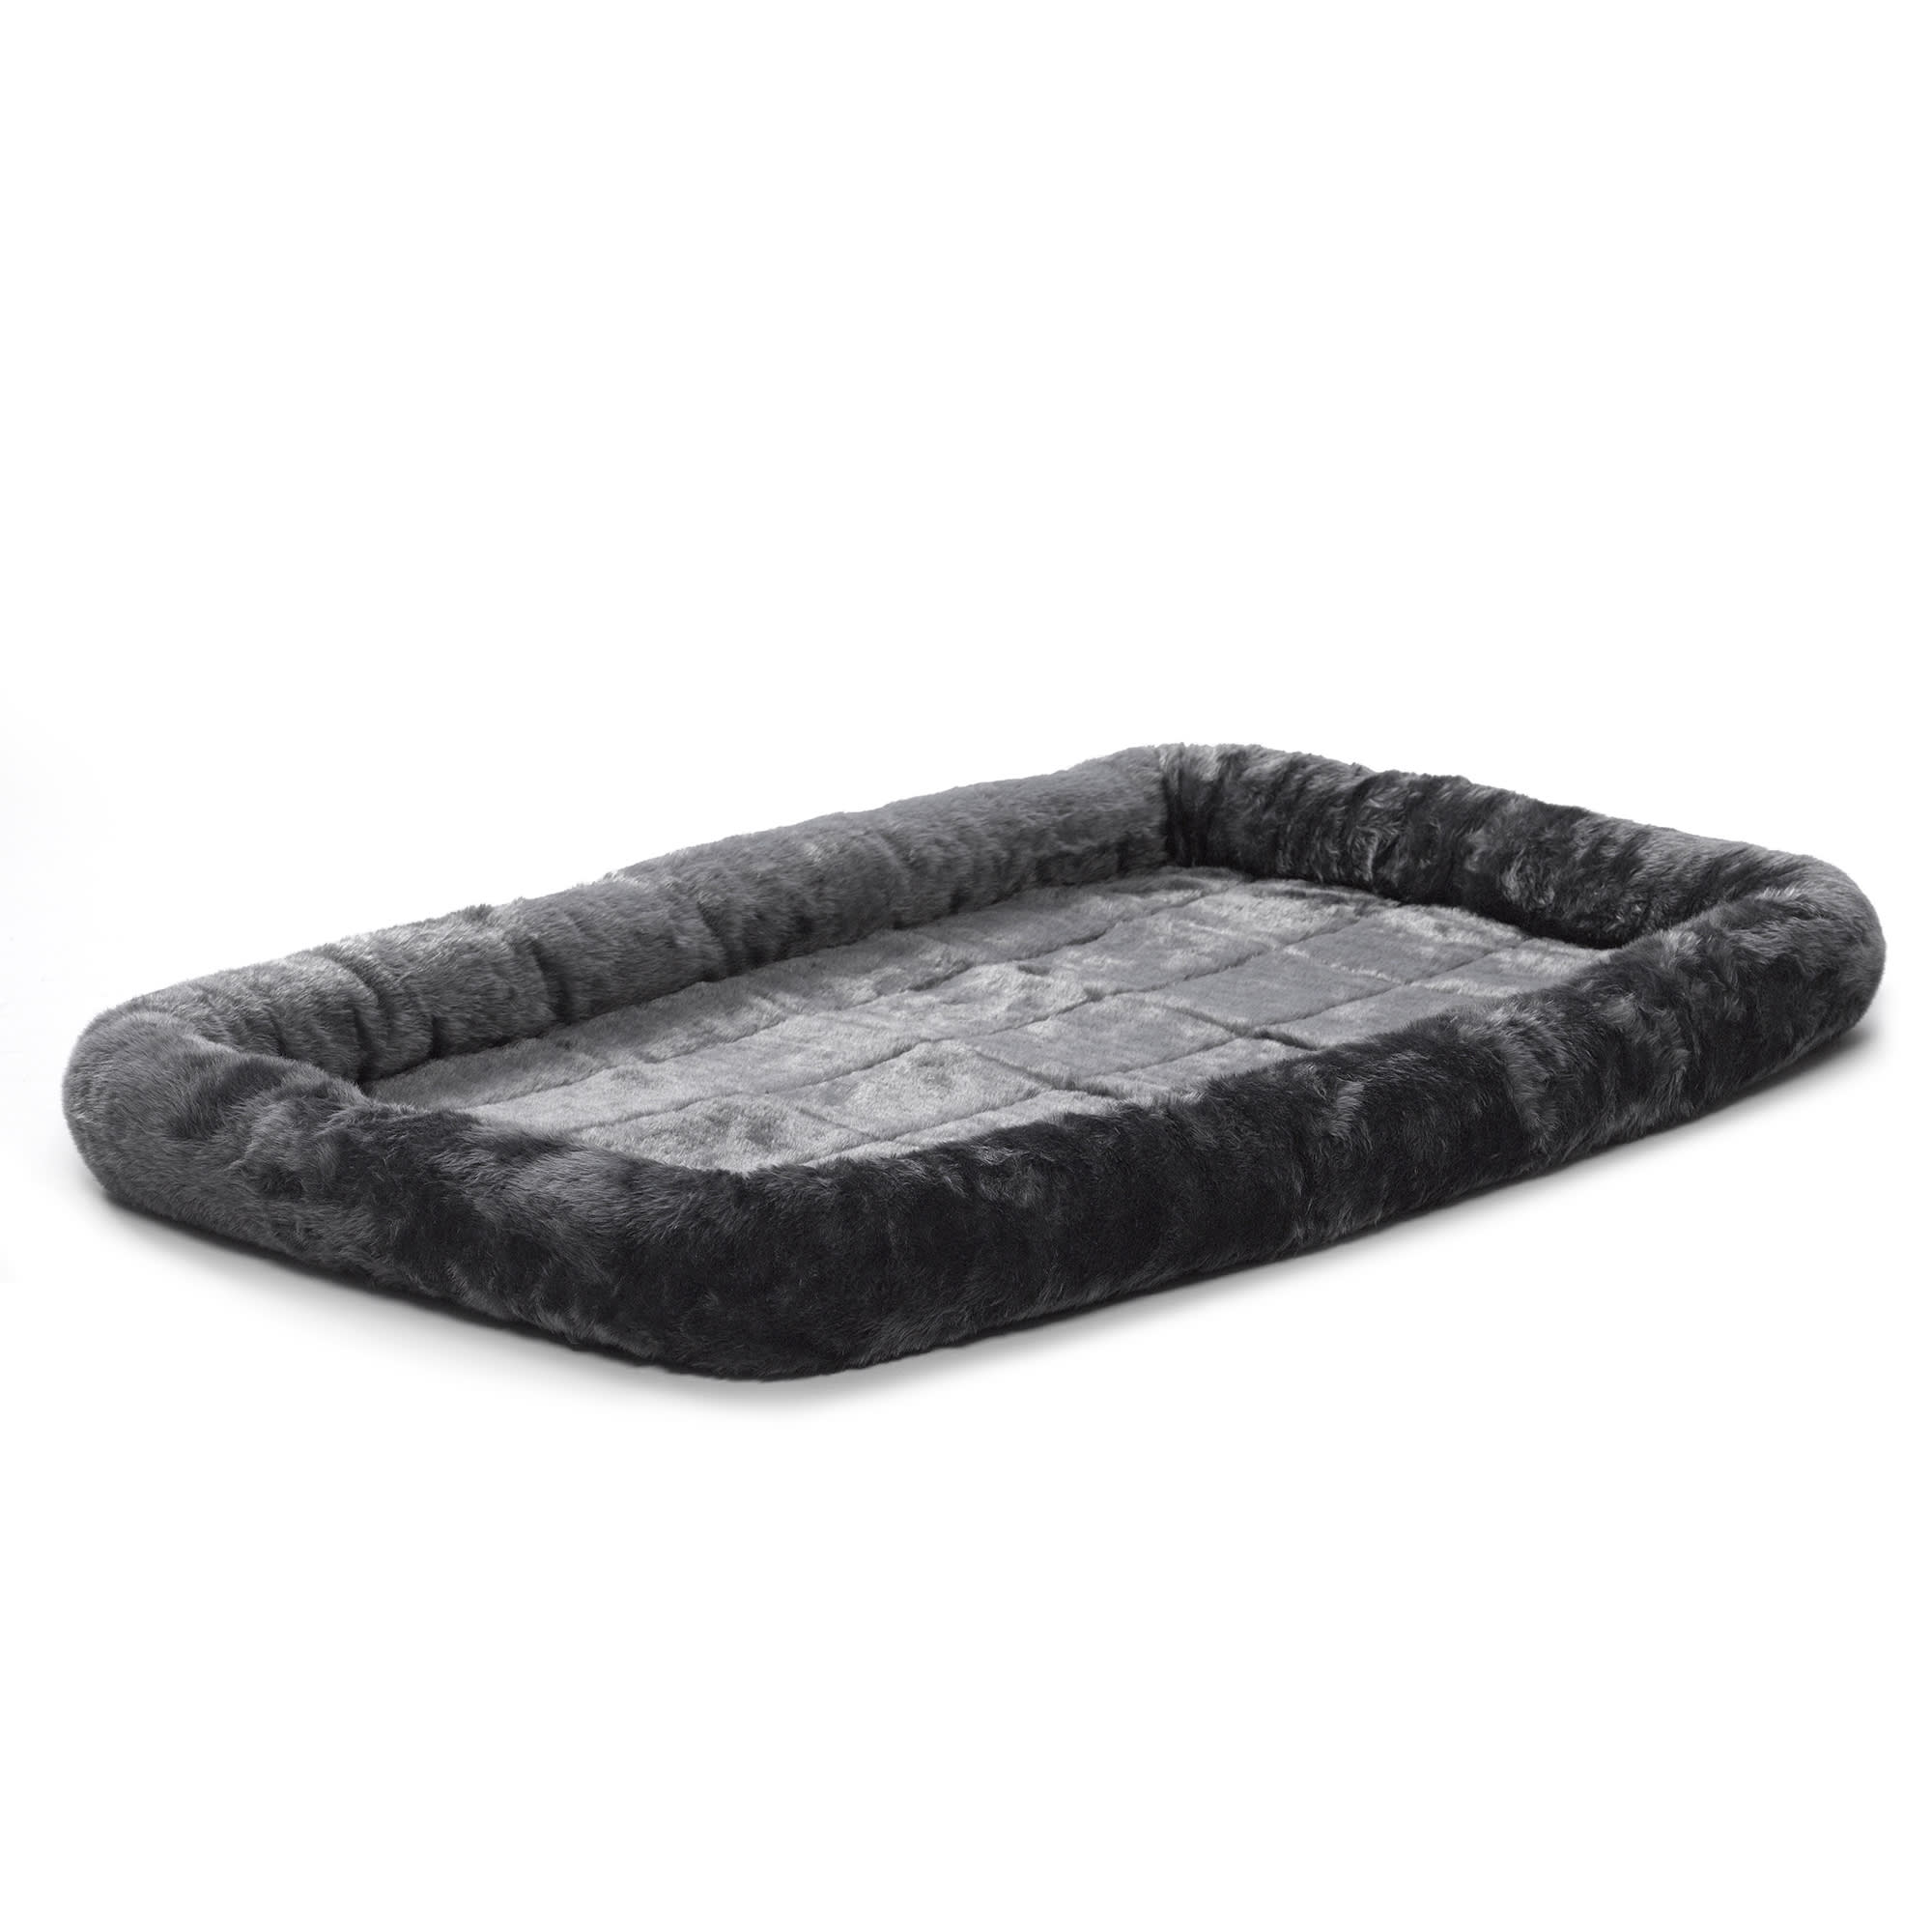 Photos - Bed & Furniture Midwest Quiet Time Bolster Gray Dog Bed, 42" L X 26" W, X-Large, G 